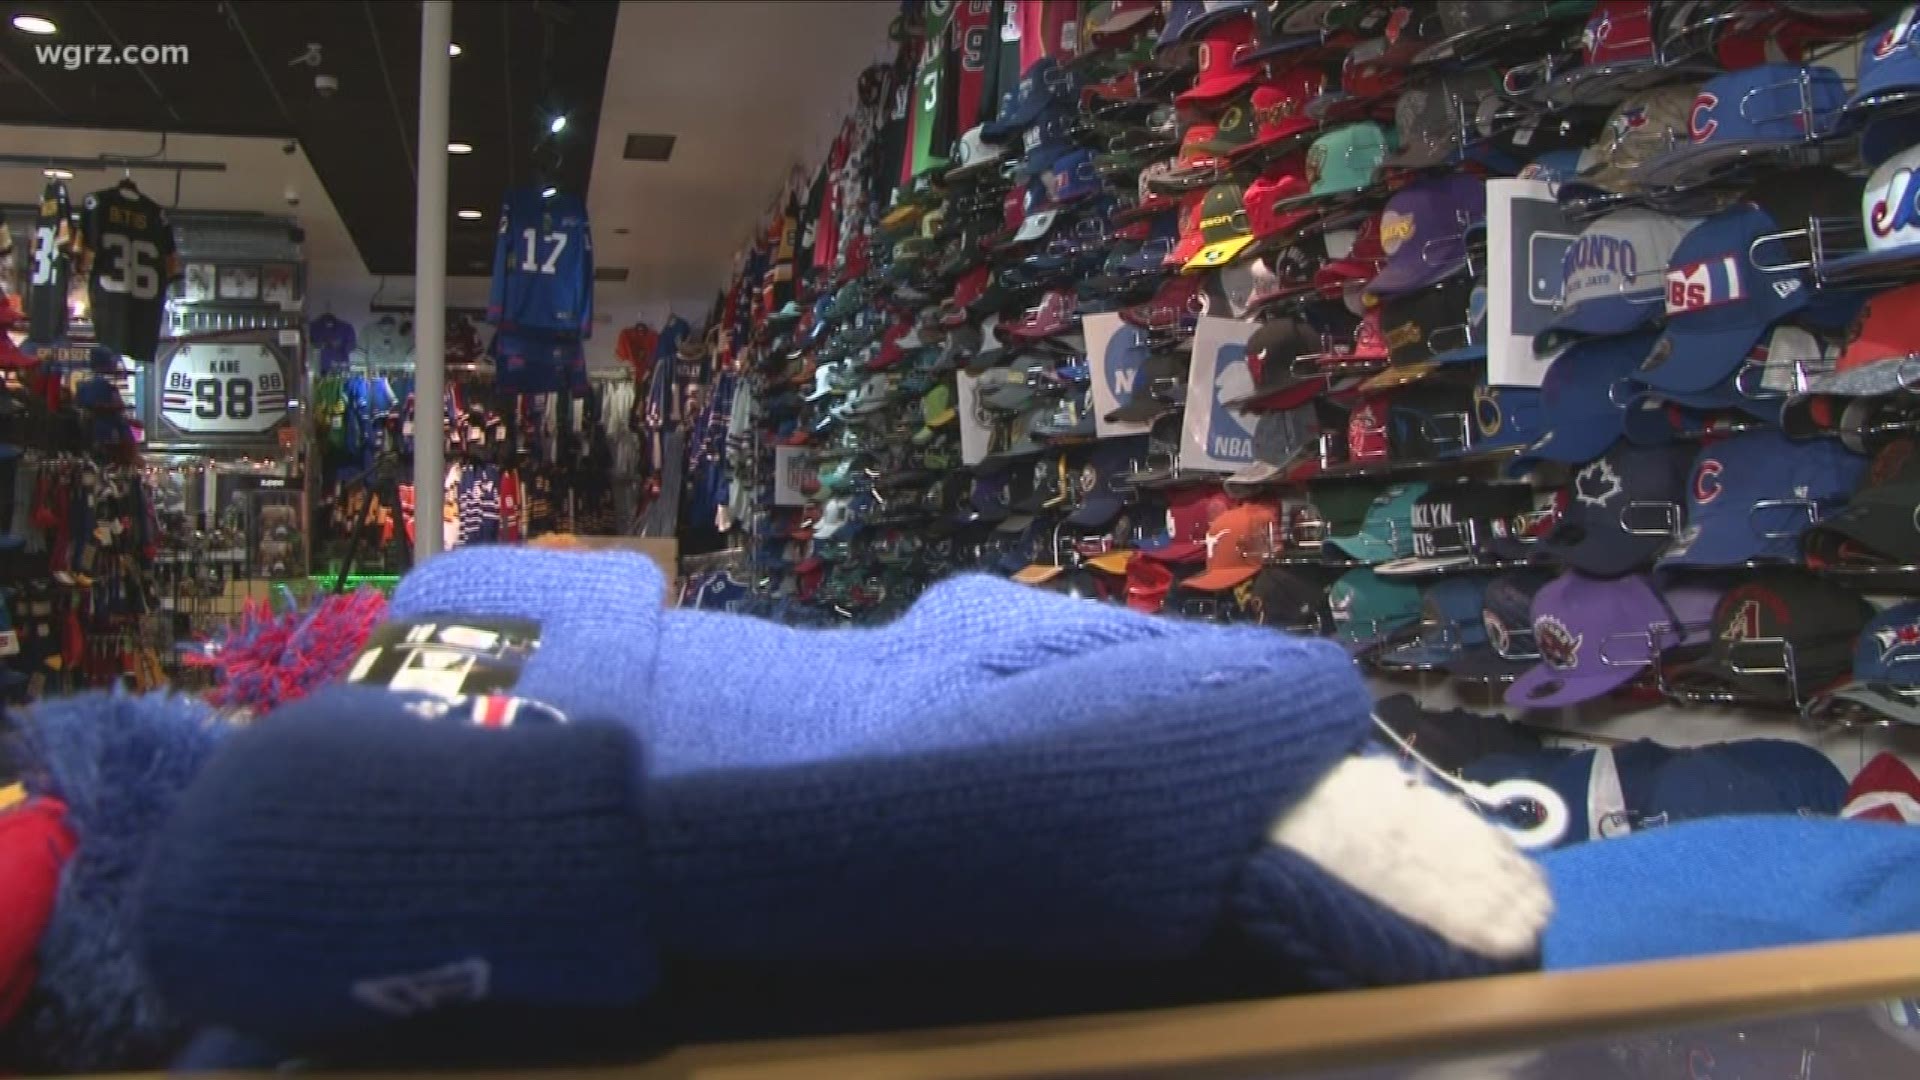 We wanted to know how much bills gear is flying off the shelves this holiday season. We talked to folks at "Sports Obsession" in the Walden Galleria to find out.